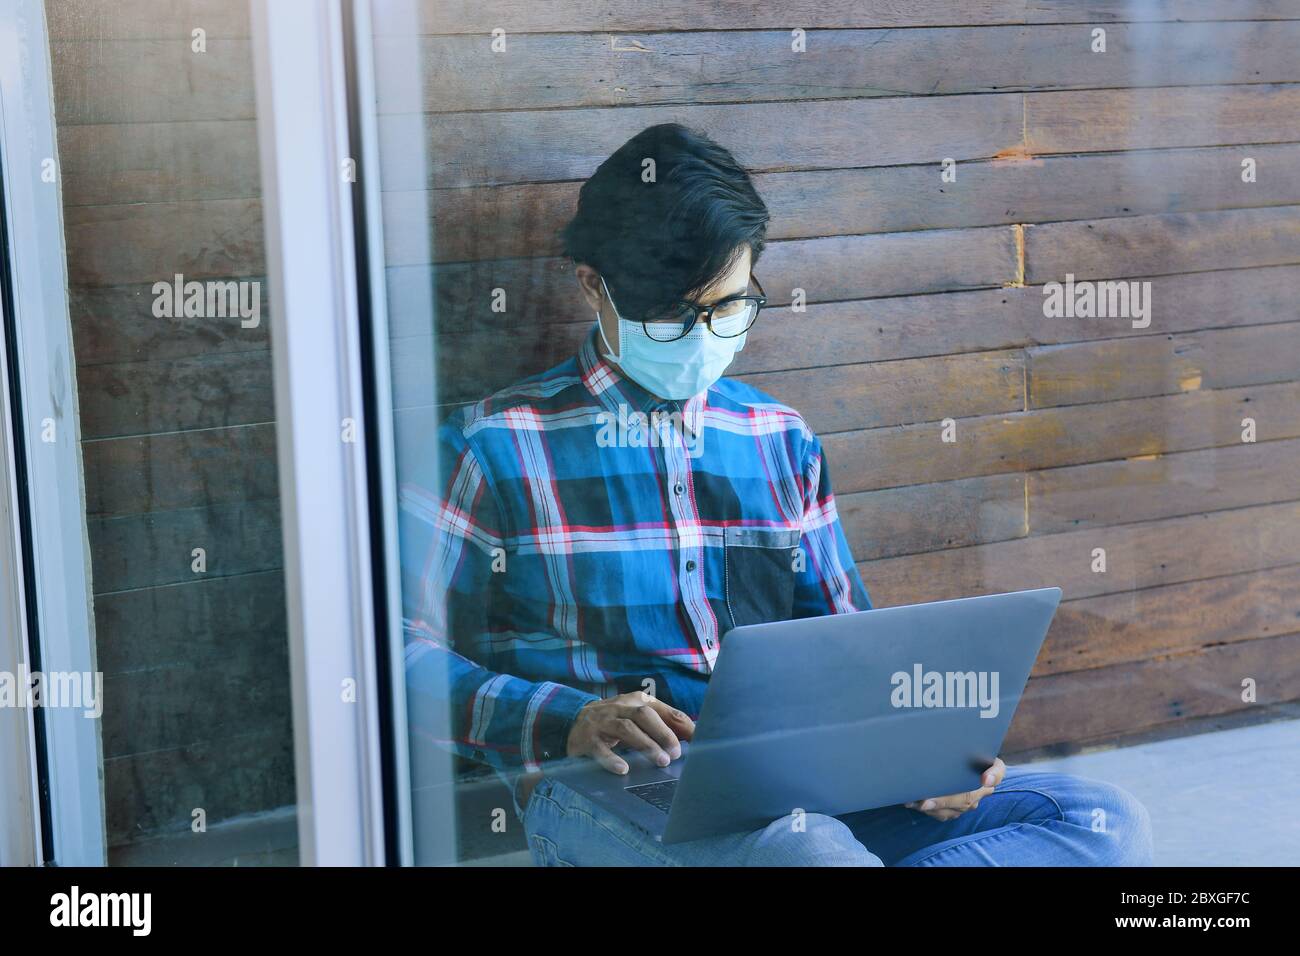 Man wearing a face mask sitting outdoors using a laptop, Thailand Stock Photo